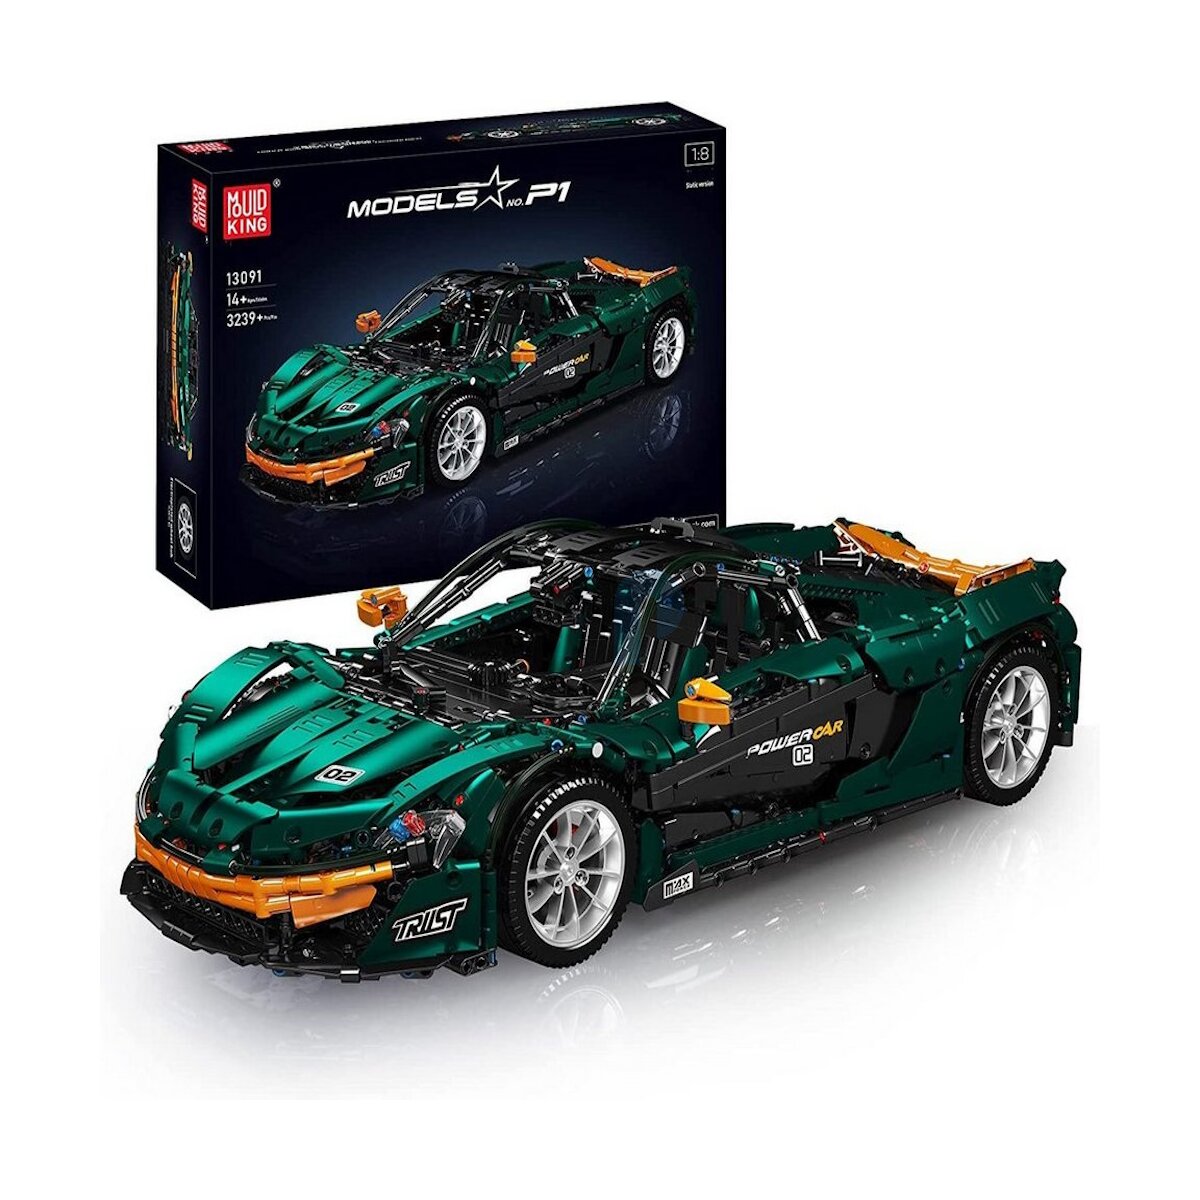 Mould King 13091 - Sports Car P1 (3239 pieces), 169.00 CHF